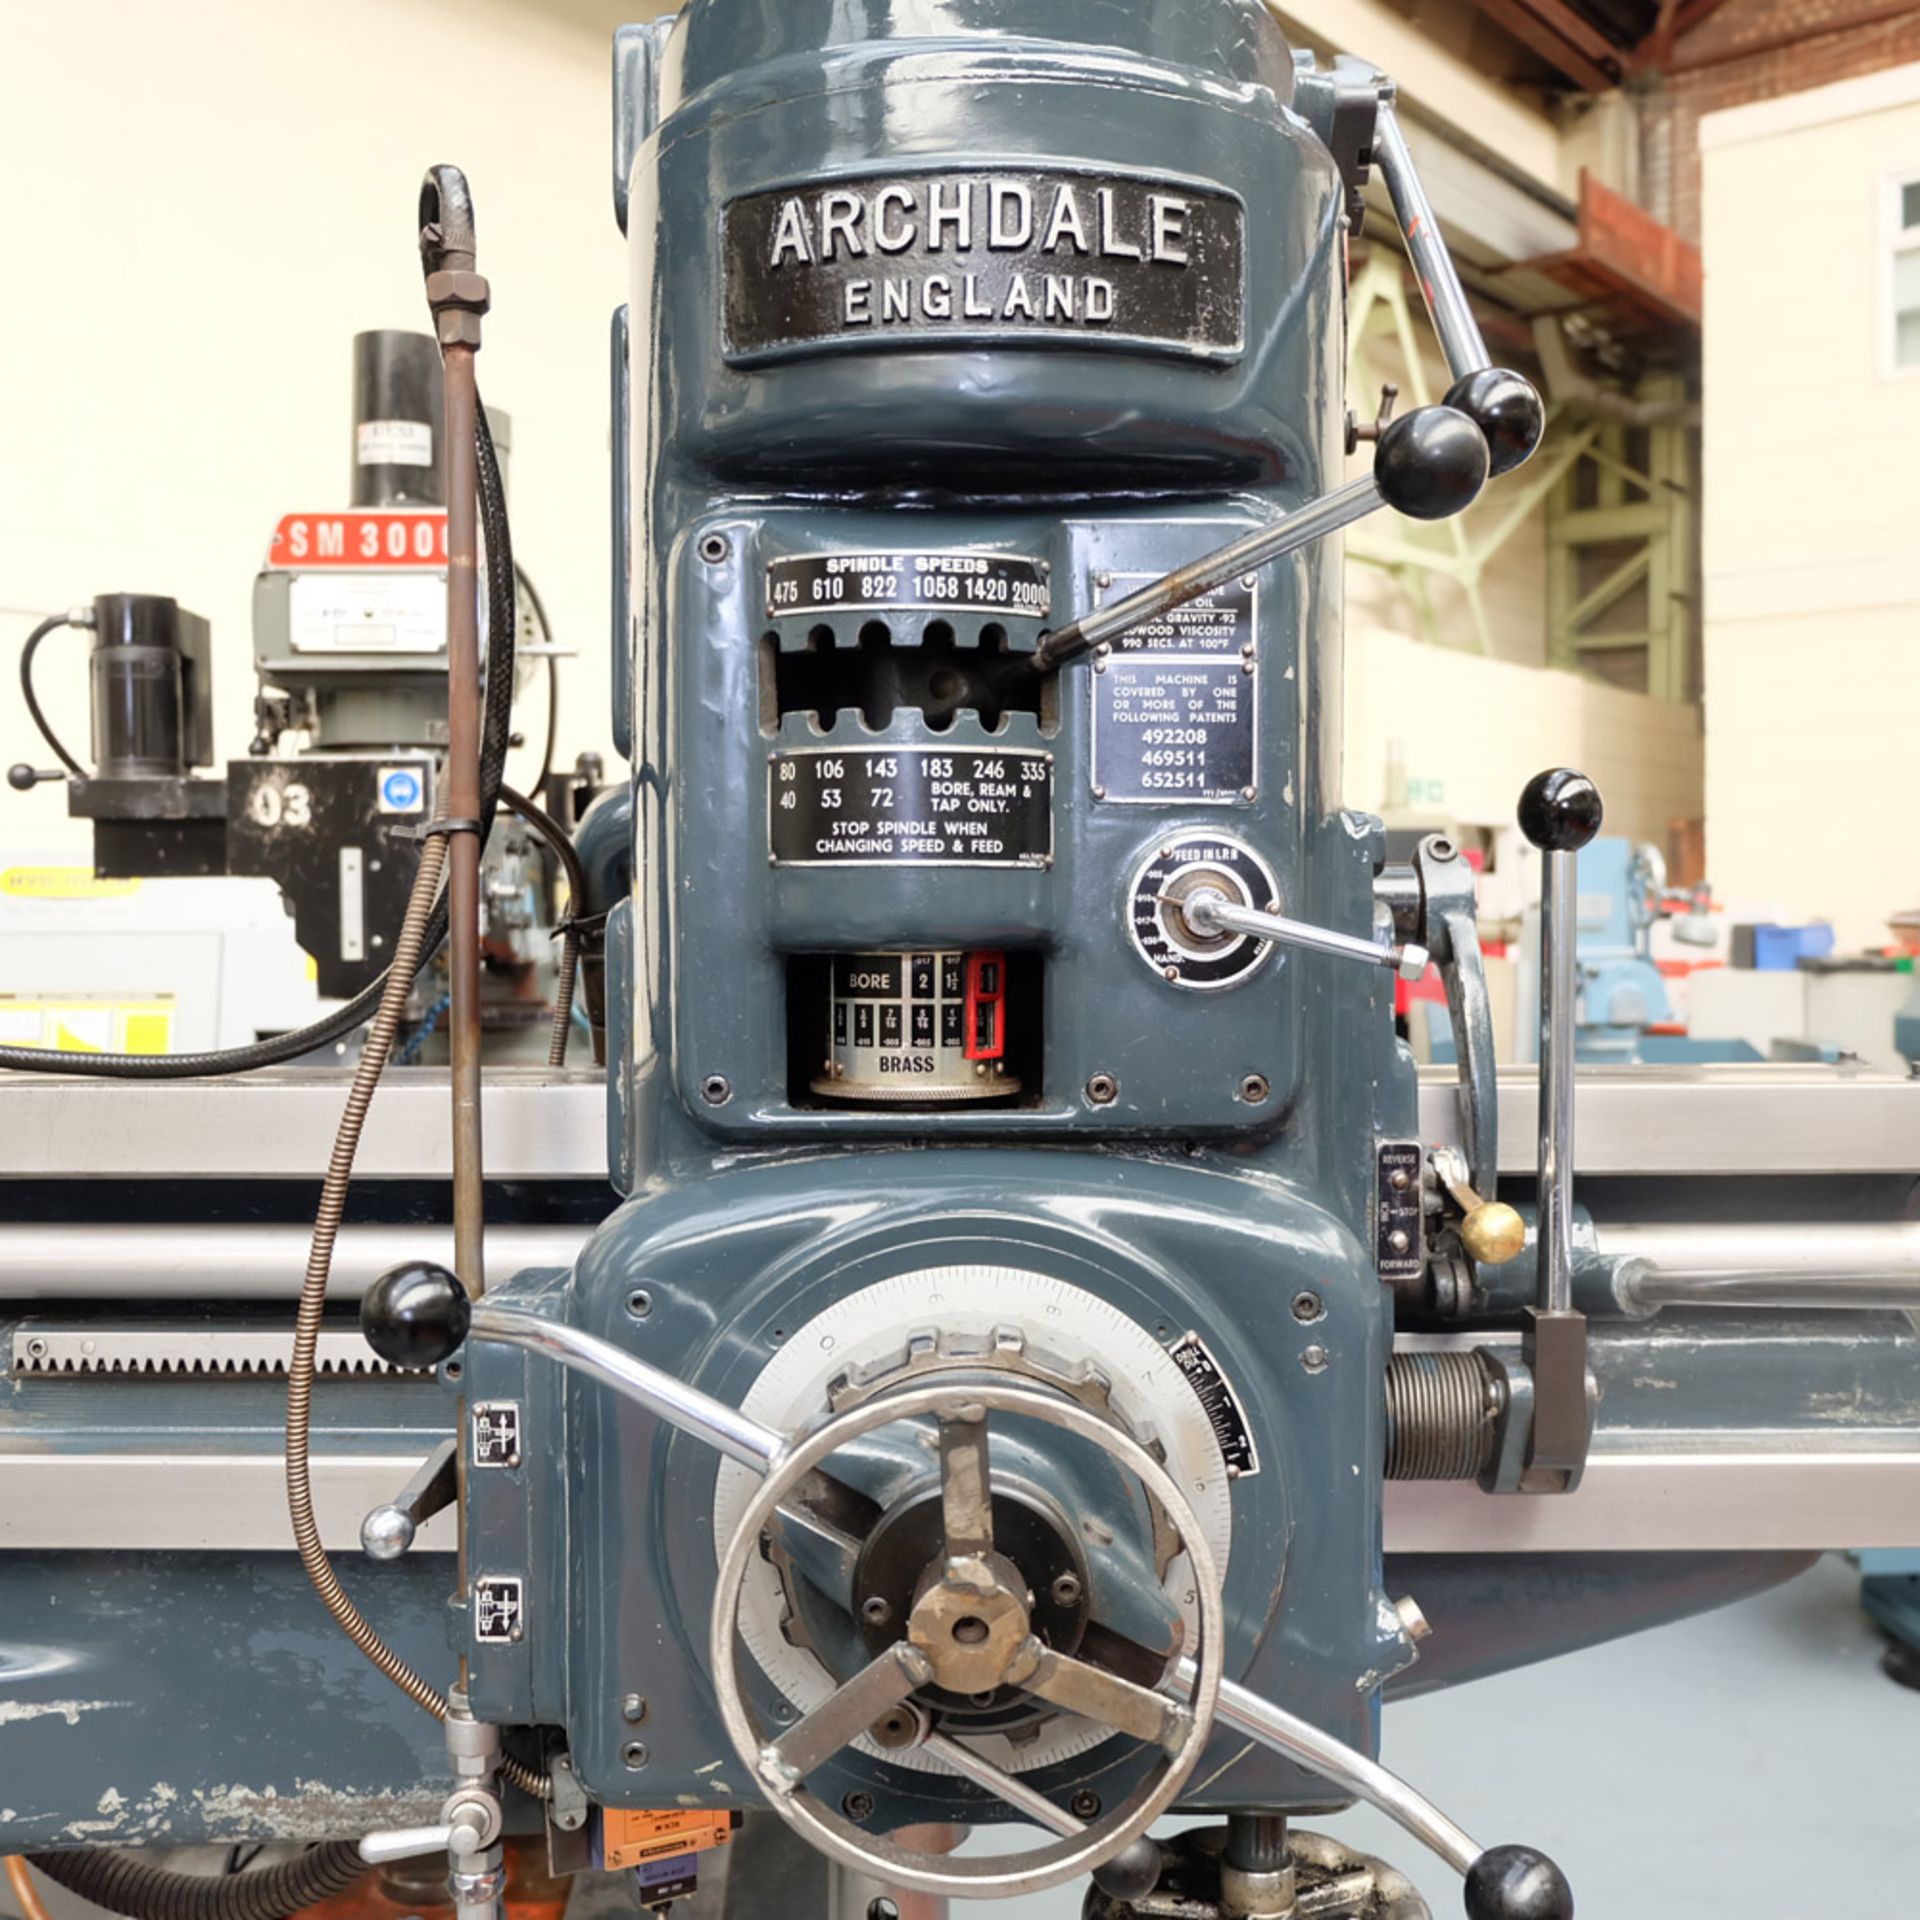 Archdale 3'6" Radial Arm Drill. Radius of Arm 42". Spindle Taper No.4 Morse. - Image 3 of 9